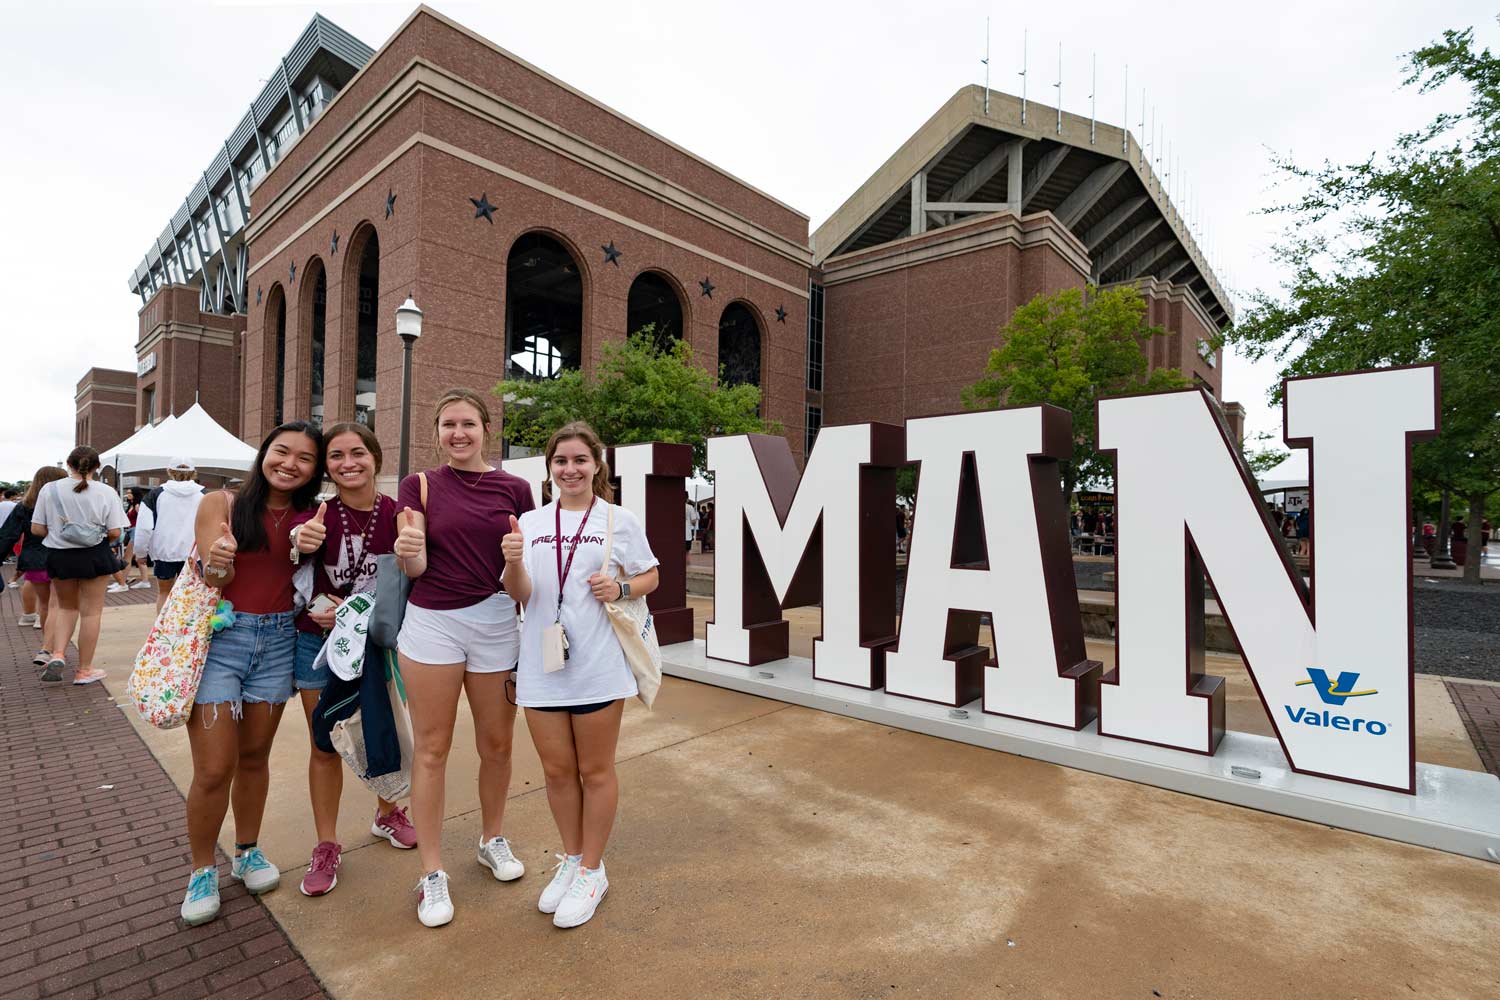 91Ƶ Students posing in front of the 12th Man sign at fish fest